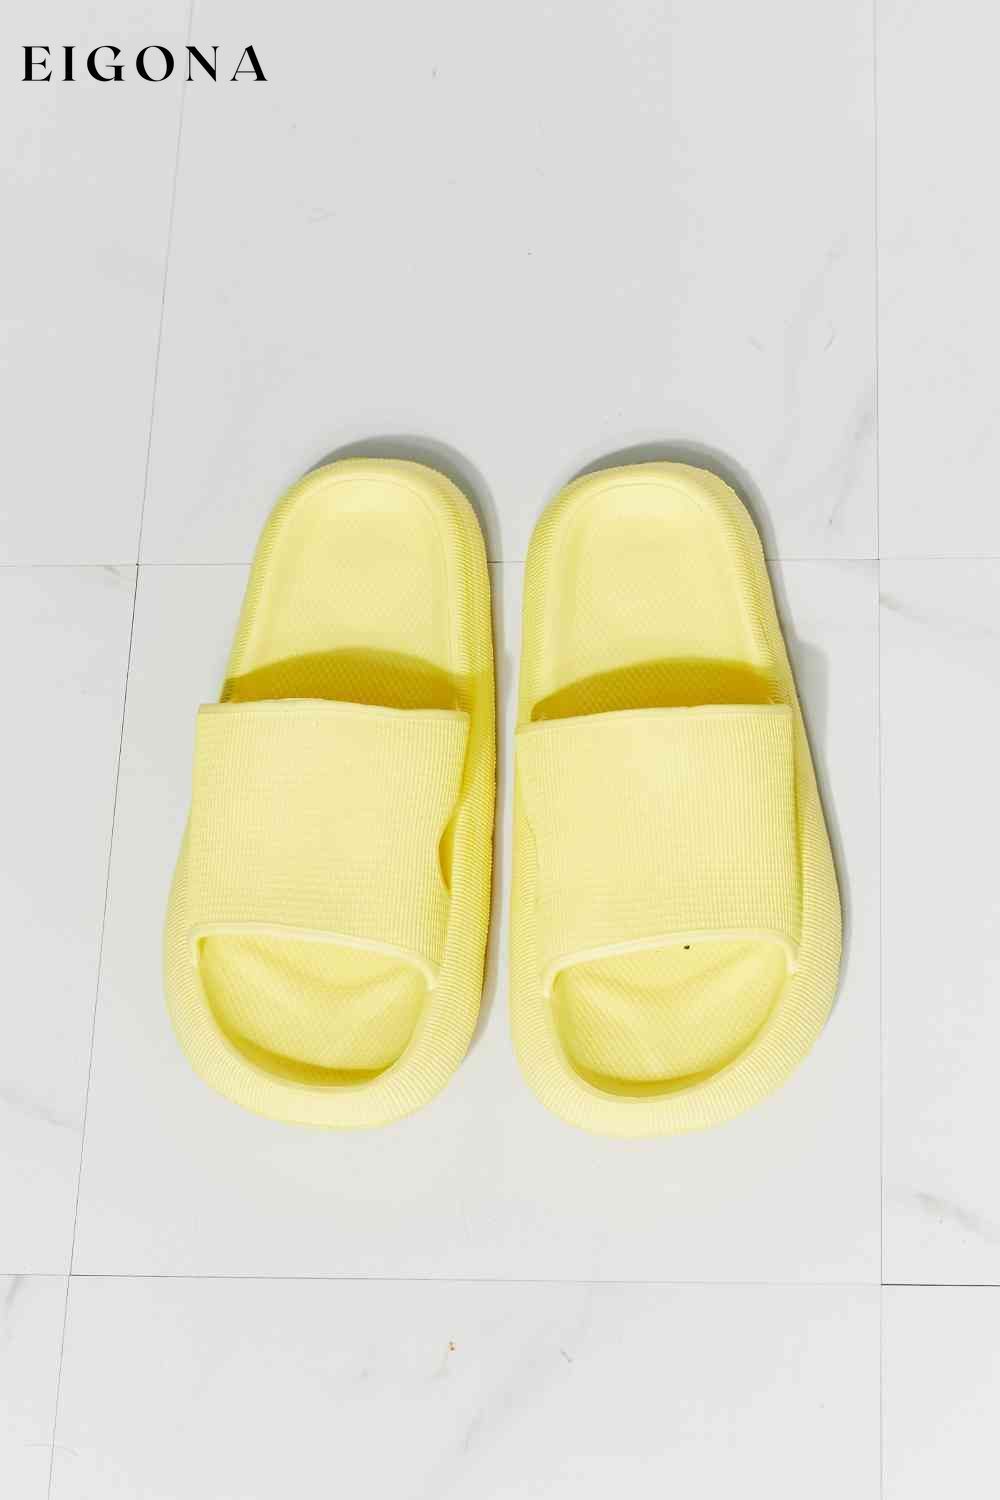 Arms Around Me Open Toe Slide in Yellow Melody Ship from USA Shoes womens shoes